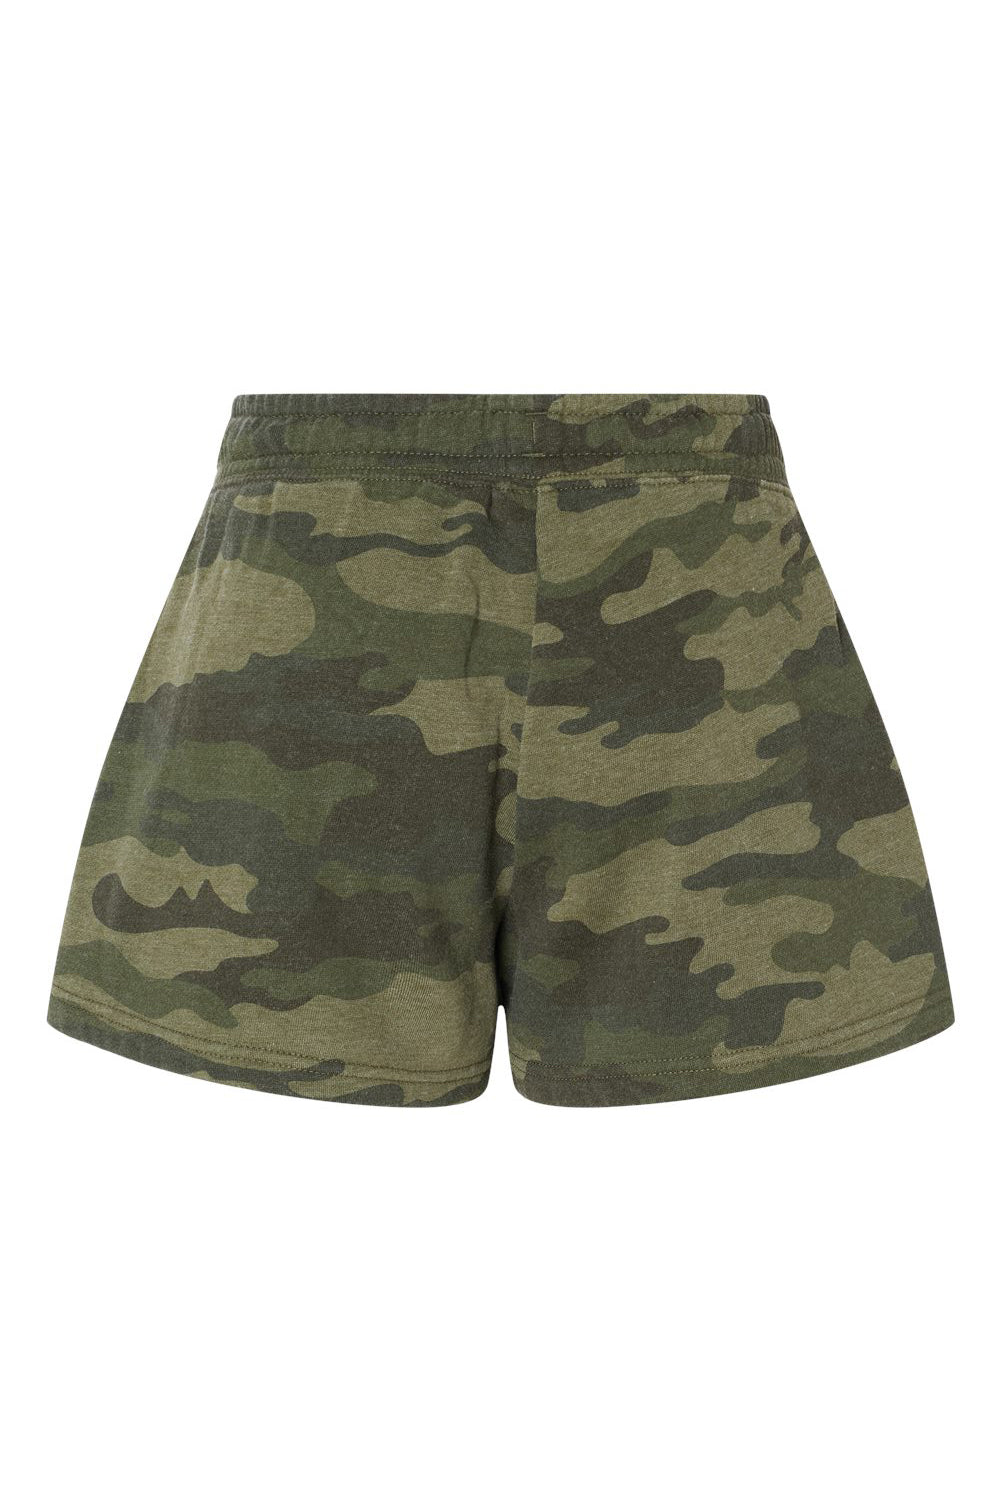 Independent Trading Co. PRM20SRT Womens California Wave Wash Fleece Shorts w/ Pockets Heather Forest Green Camo Flat Back